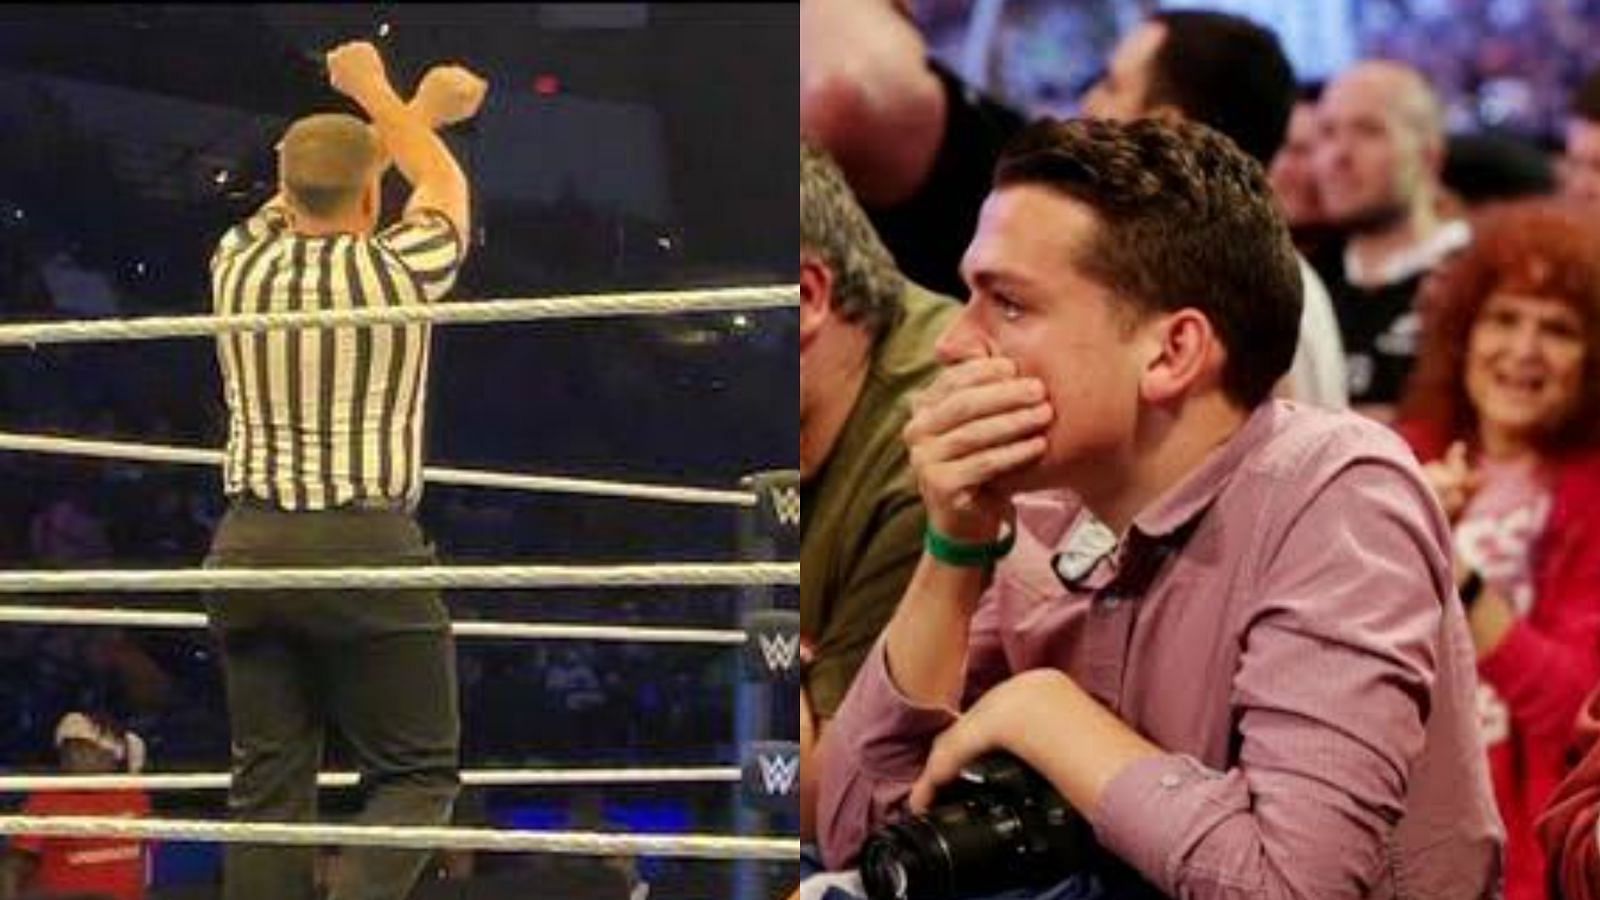 WWE star suffered an injury at a recent event!